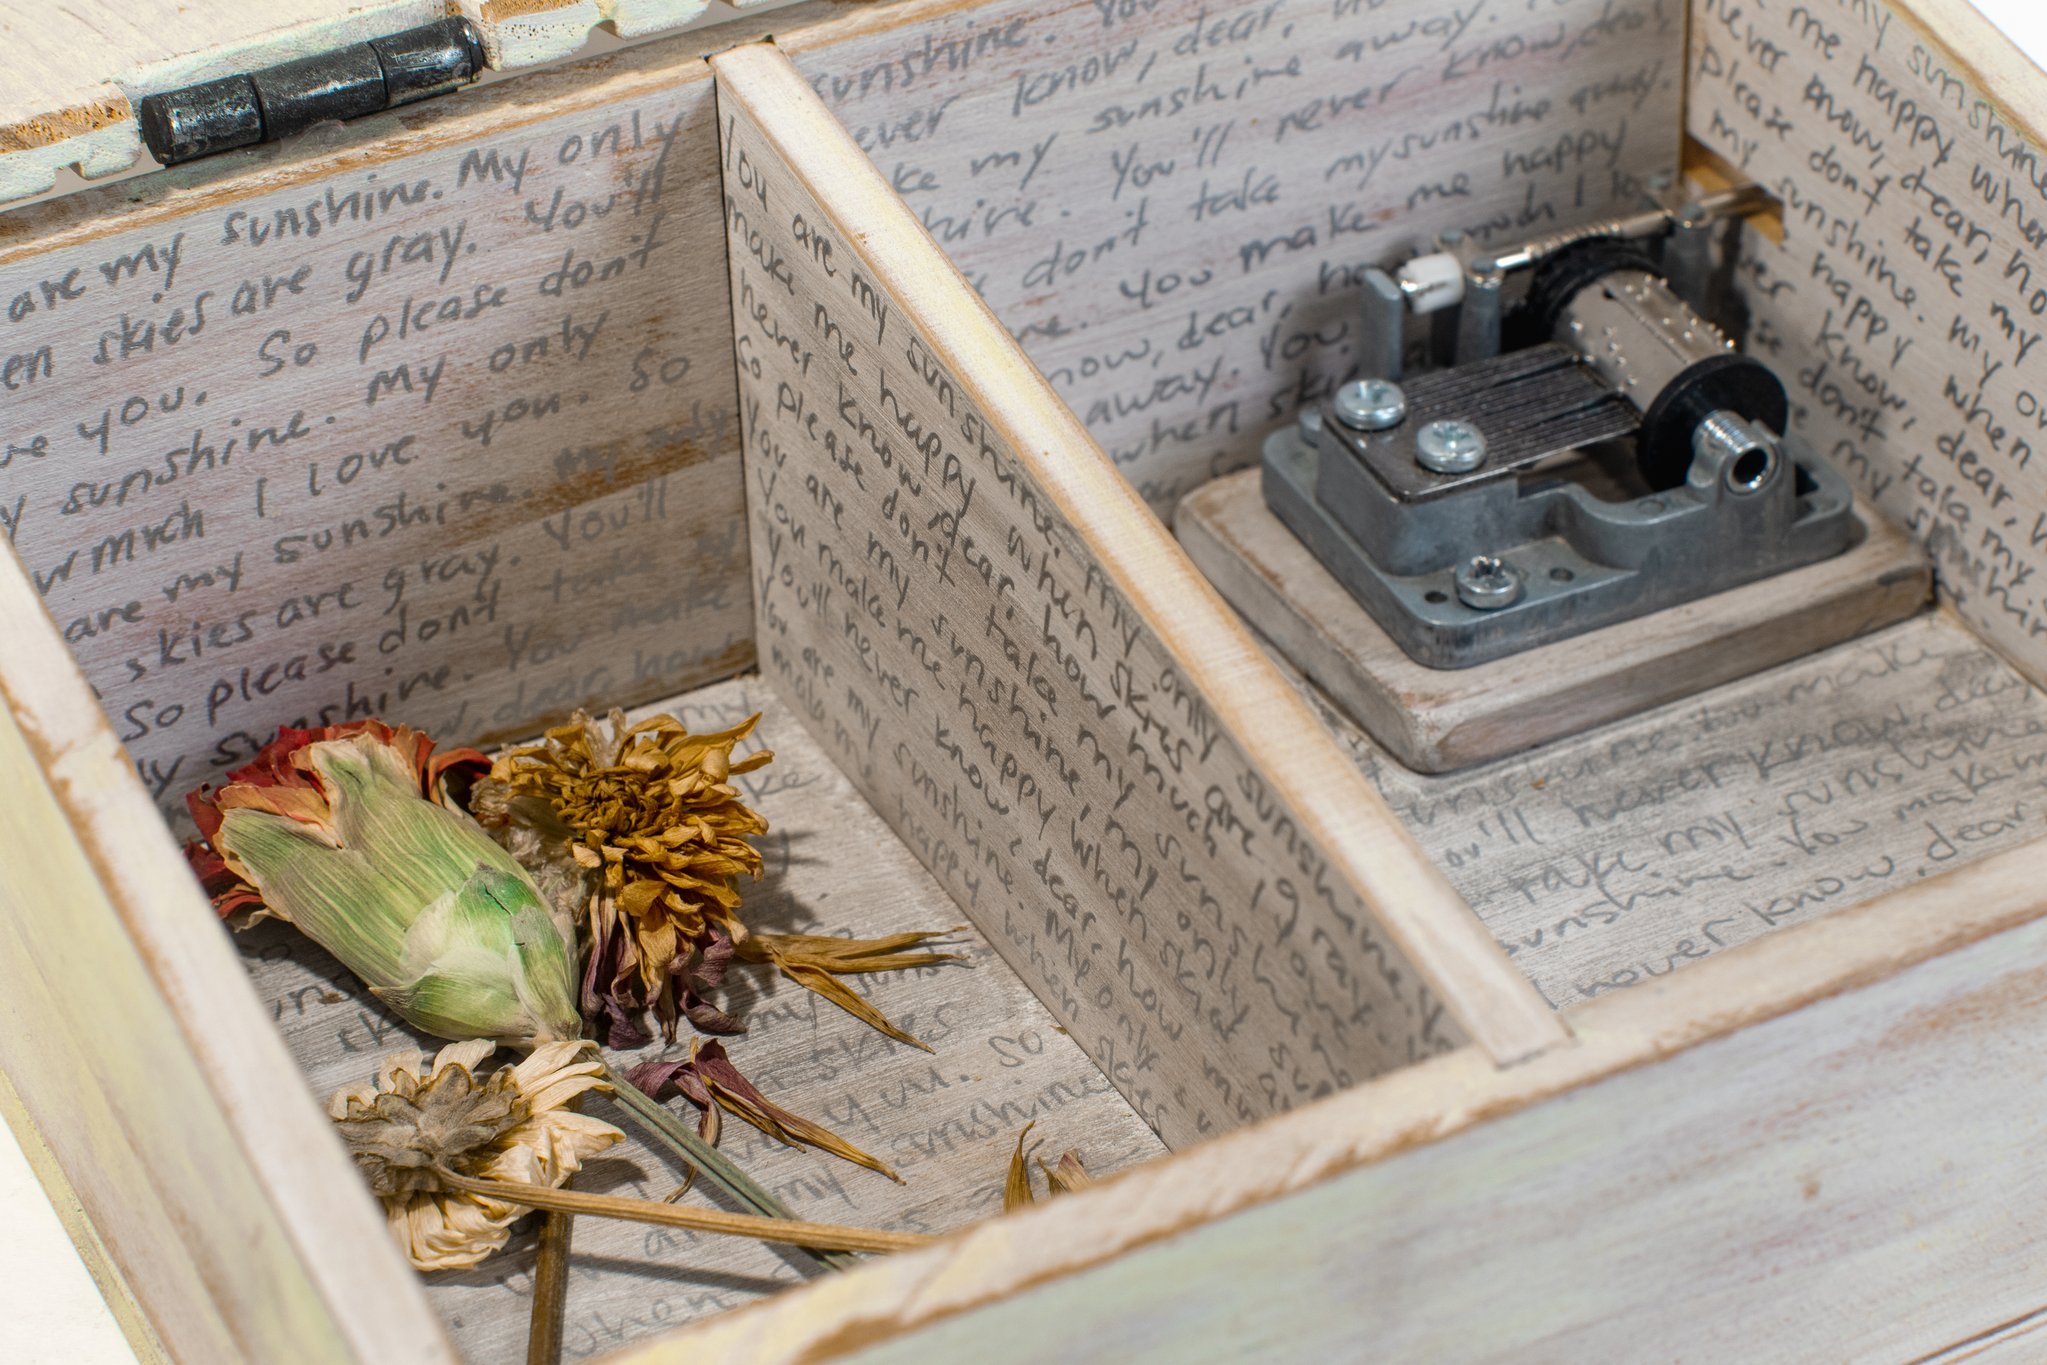 Interior detail of the inside of a music box, with dried flowers inside and handwritten text scribbled on all sides